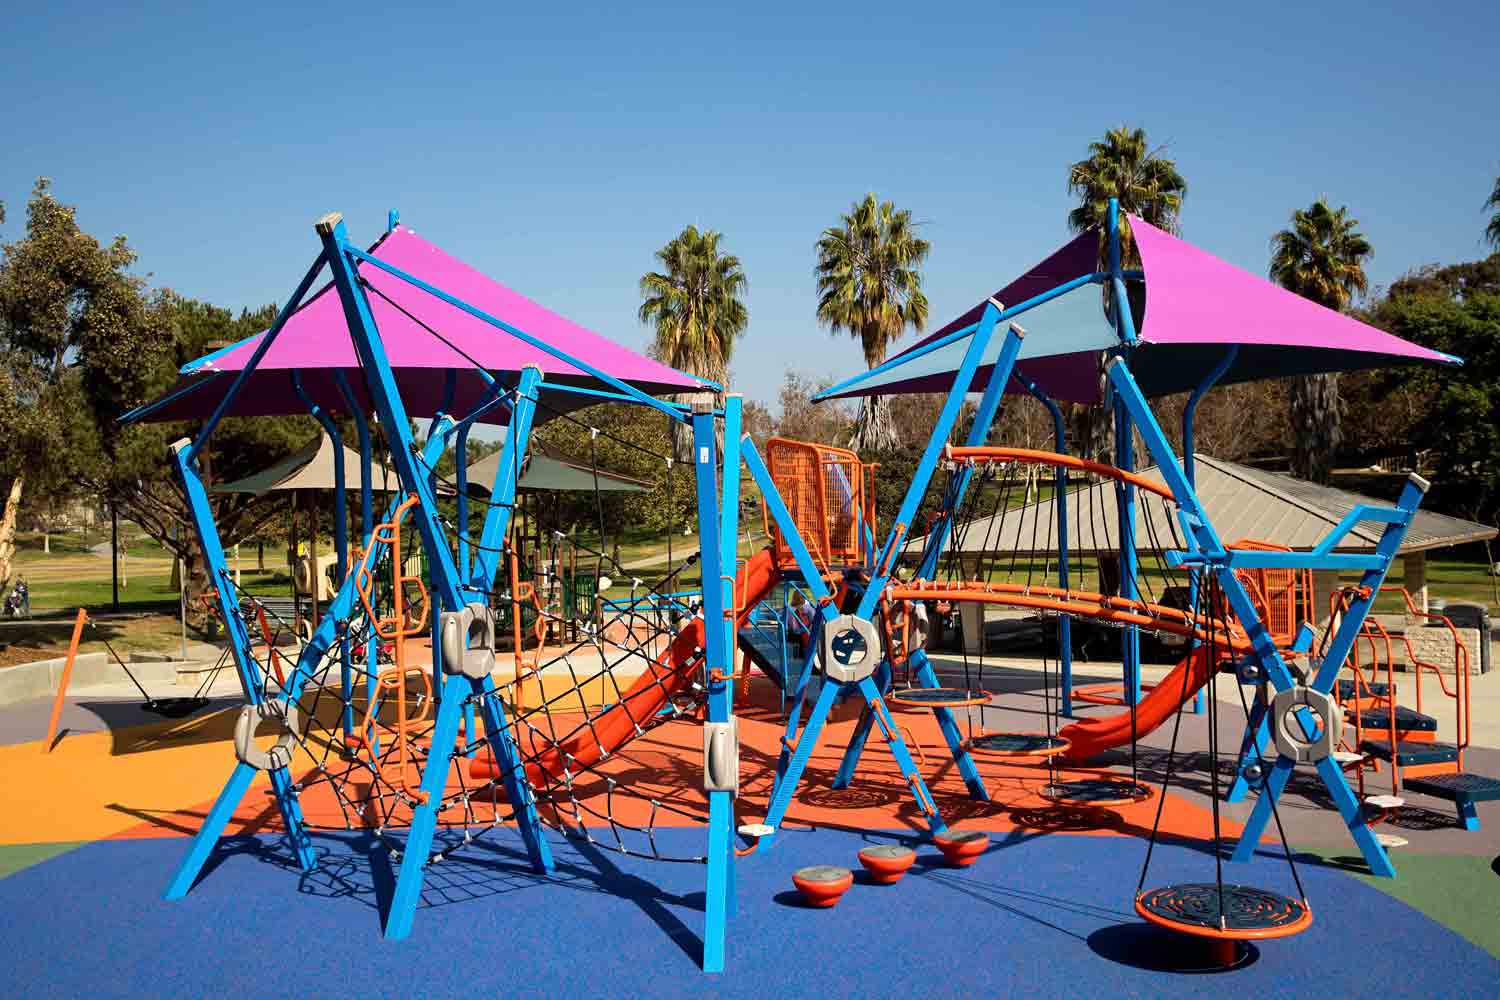 Colorful, bright commercial playground equipment